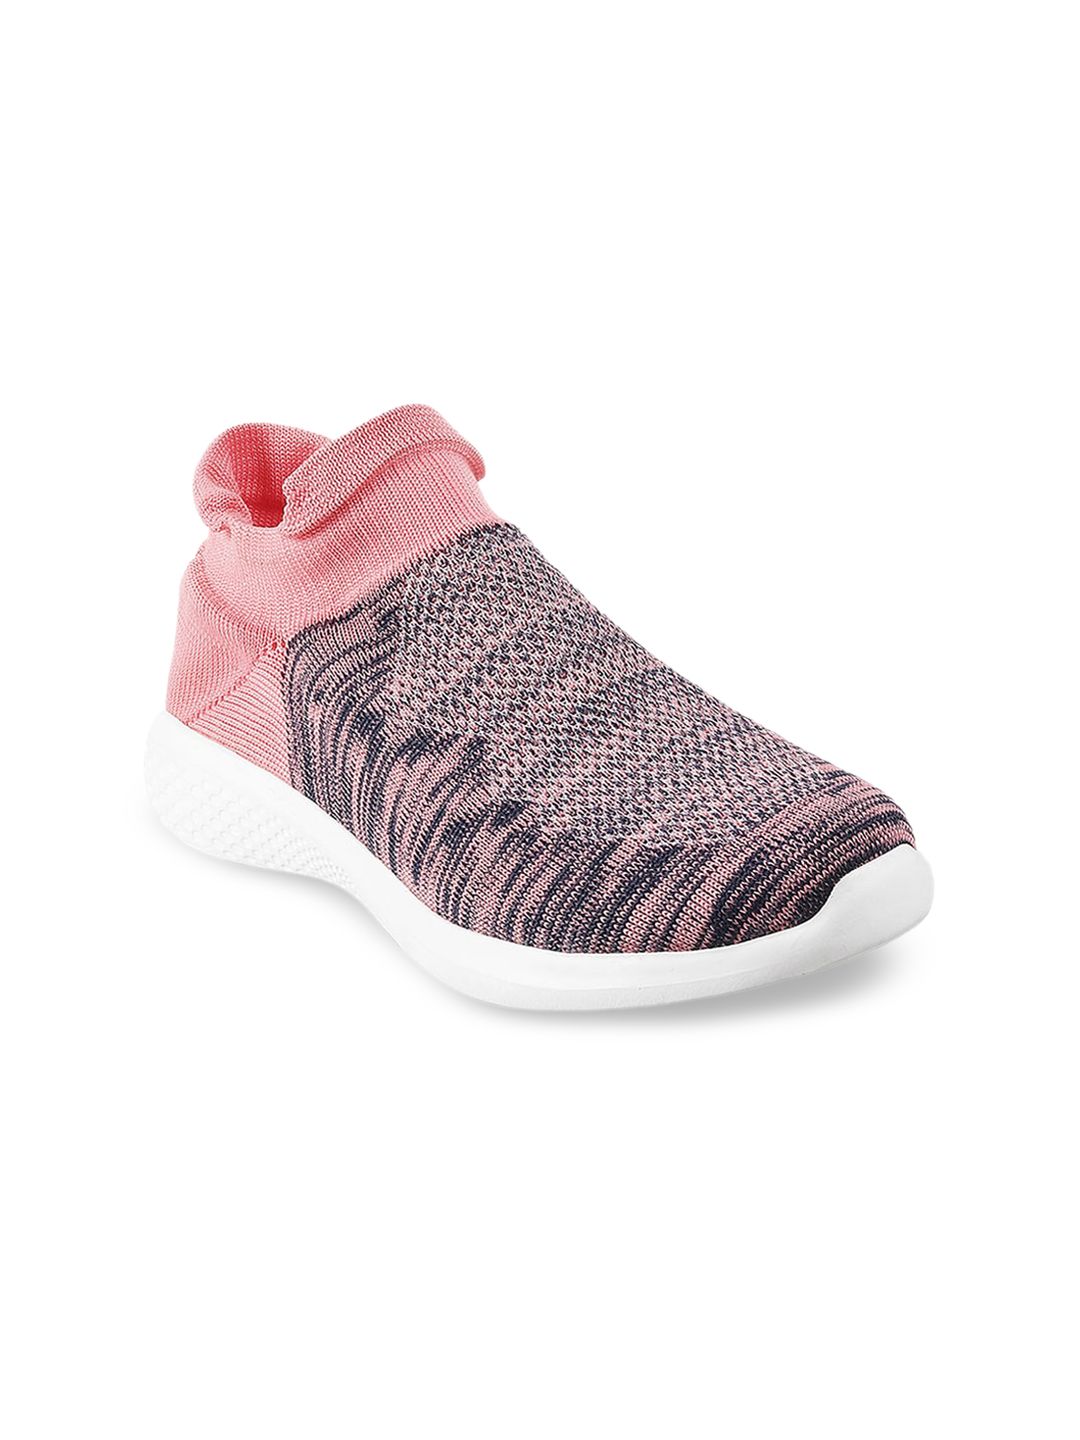 Mochi Women Pink Woven Design Slip-On Sneakers Price in India